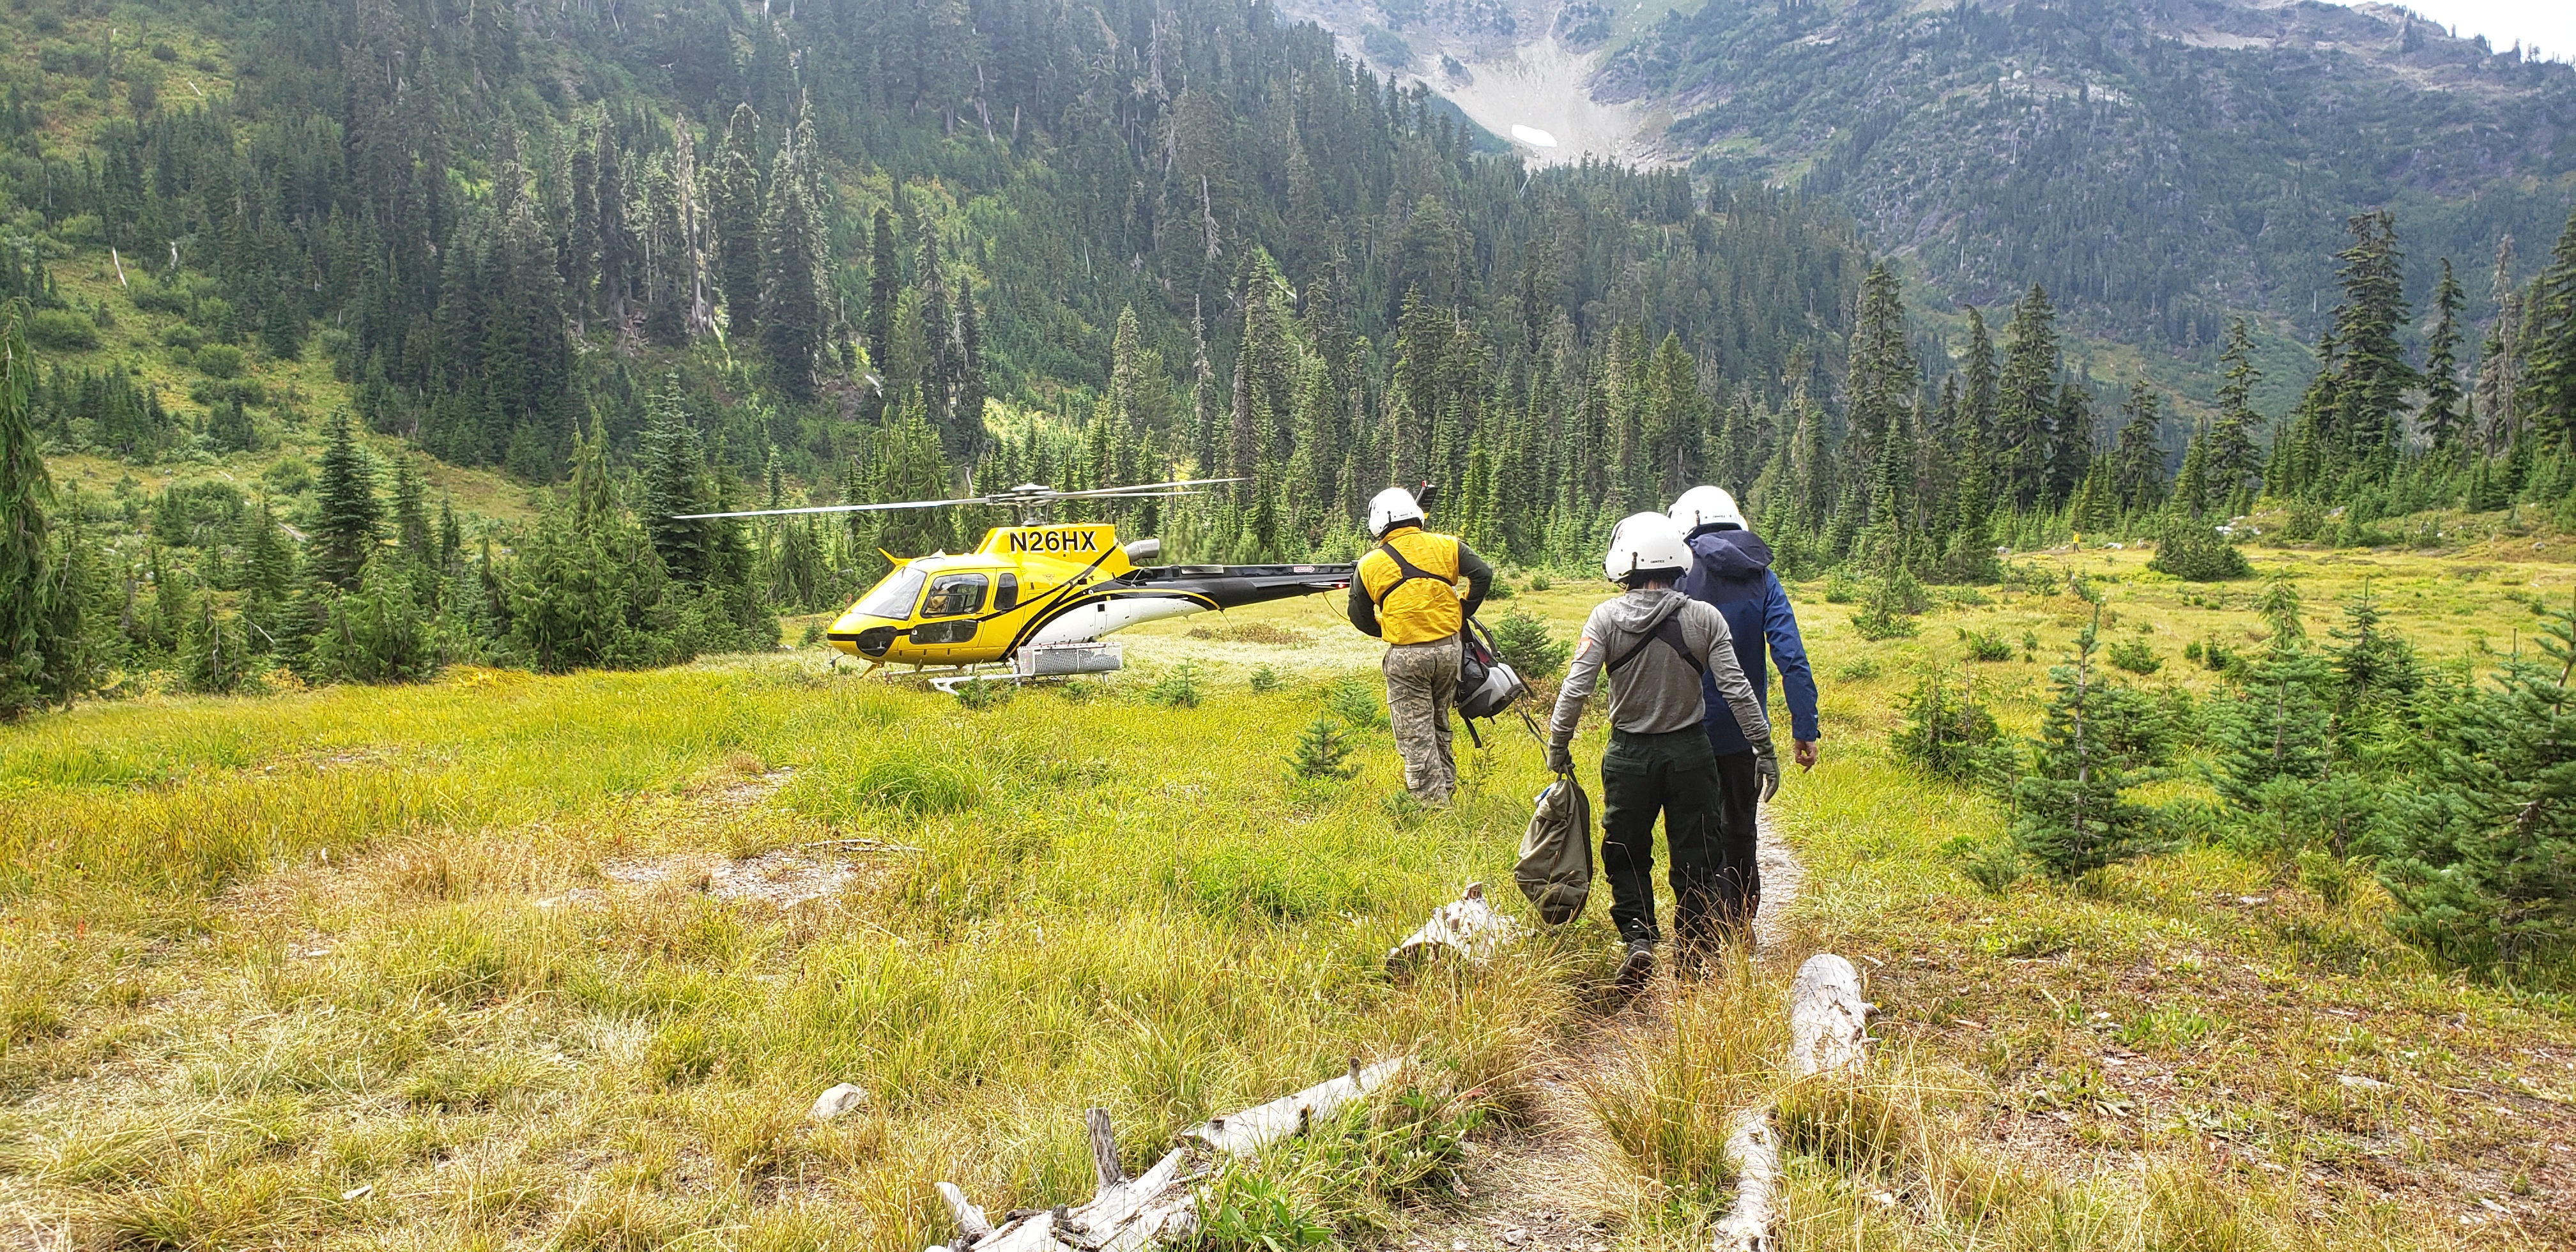 Helicopter crew walking across an open meadow towards a helicopter surrounded by forest.